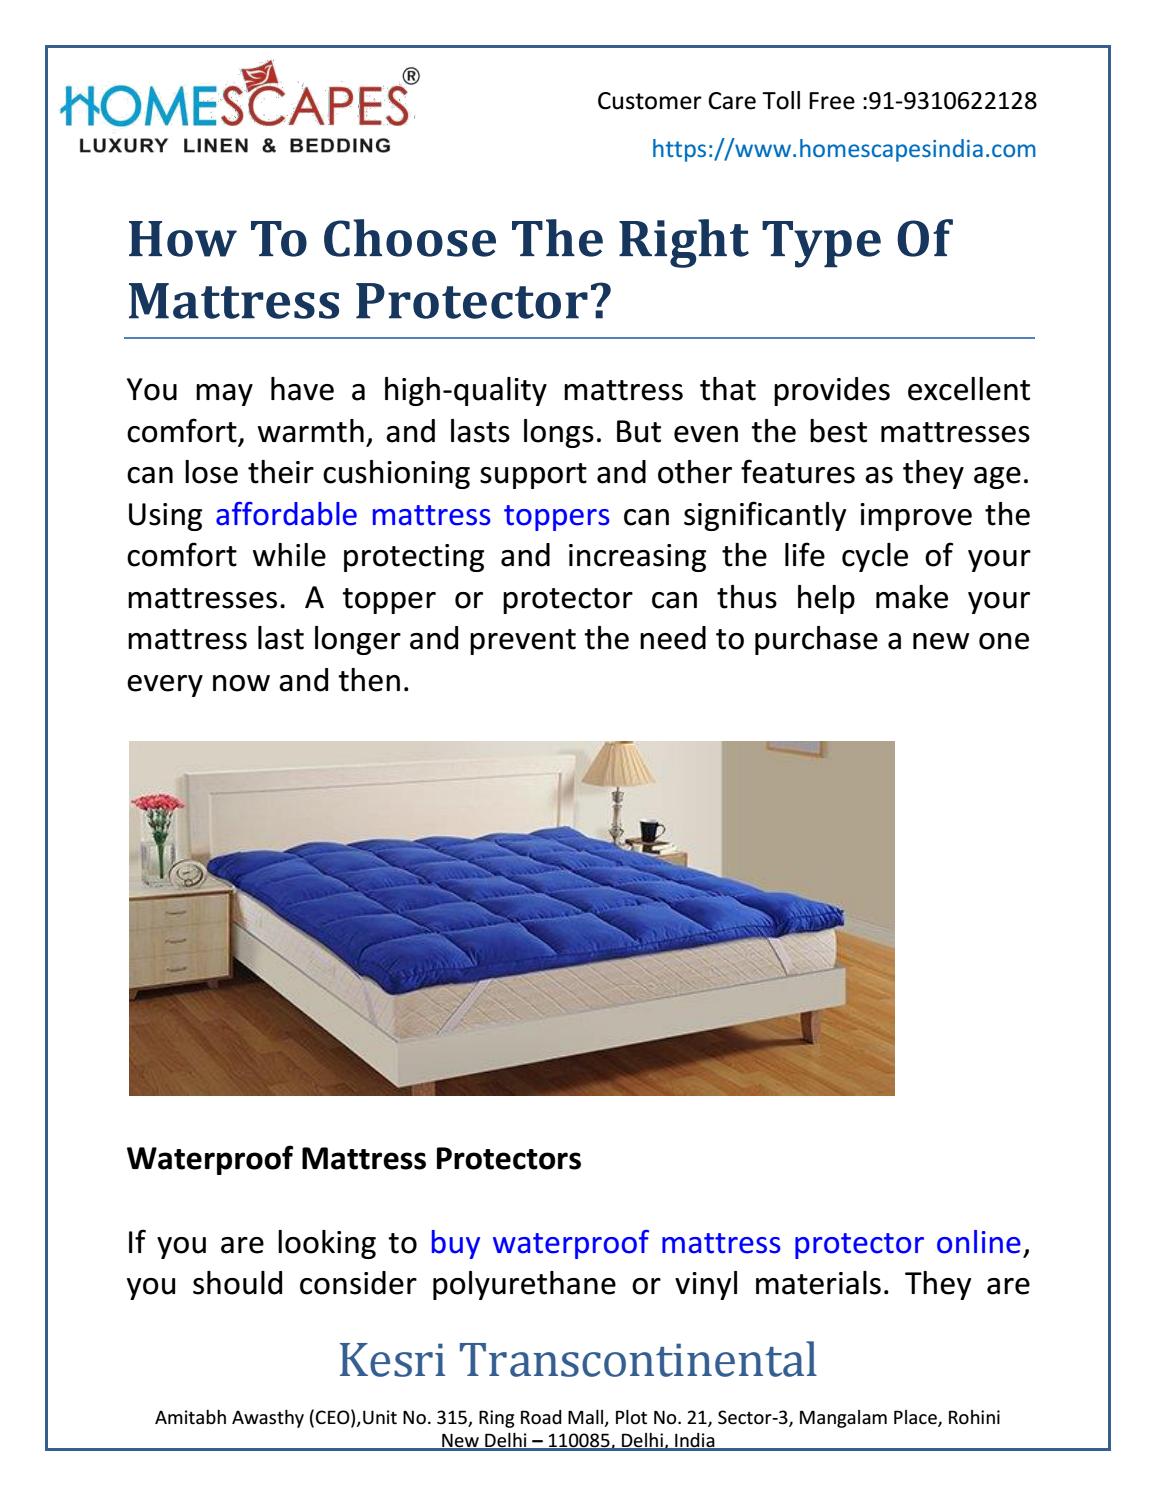 How To Choose The Right Mattress Protector